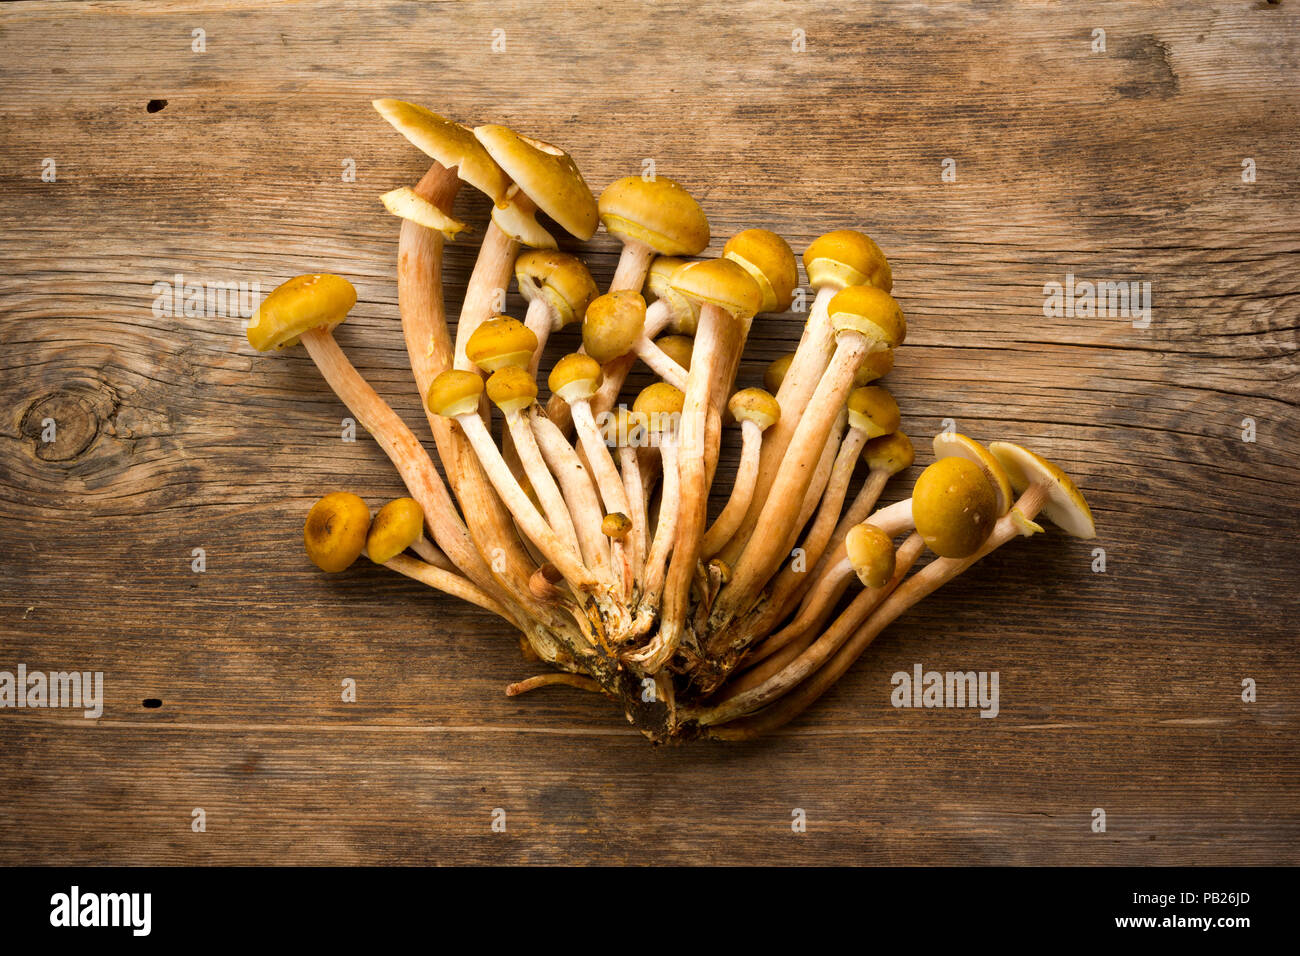 Raw Yellow Edible Forest Mushrooms Mushrooms On Old Wooden Board With Cracks. Closeup, View From Above Stock Photo